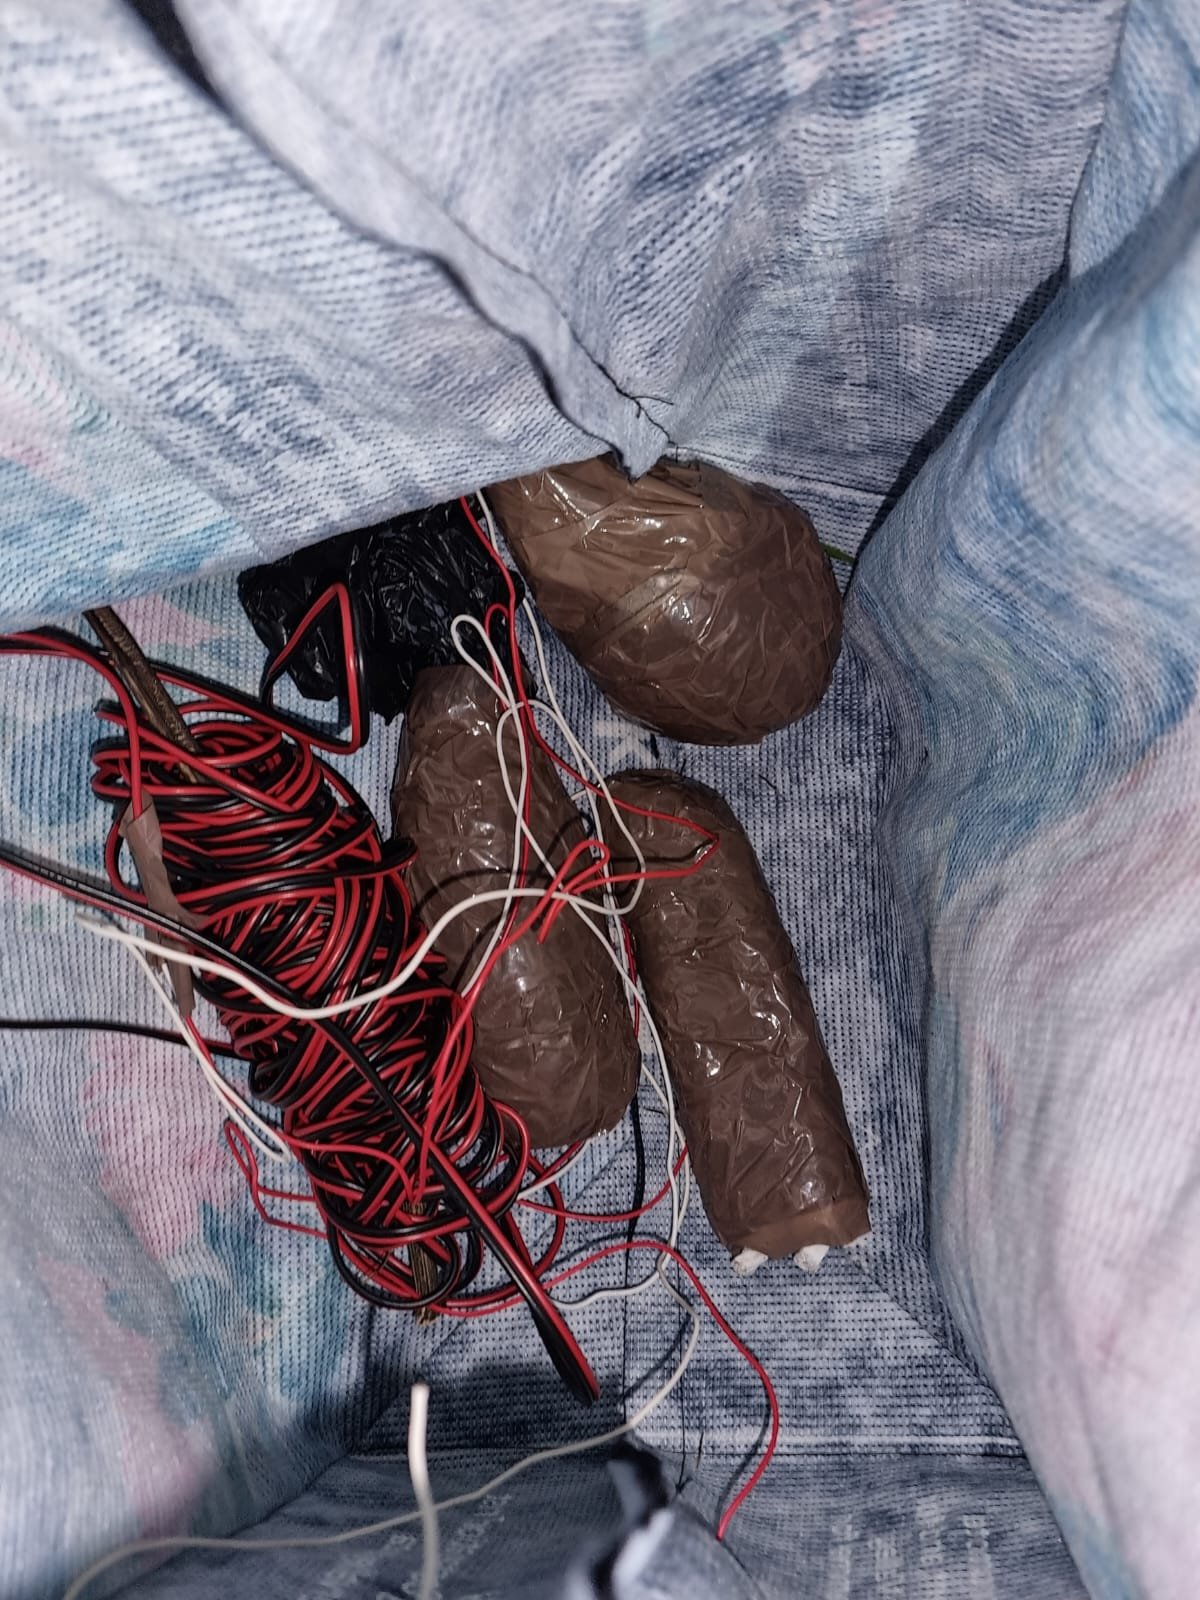 A 55-year-old man was arrested for alleged possession of illegal explosives